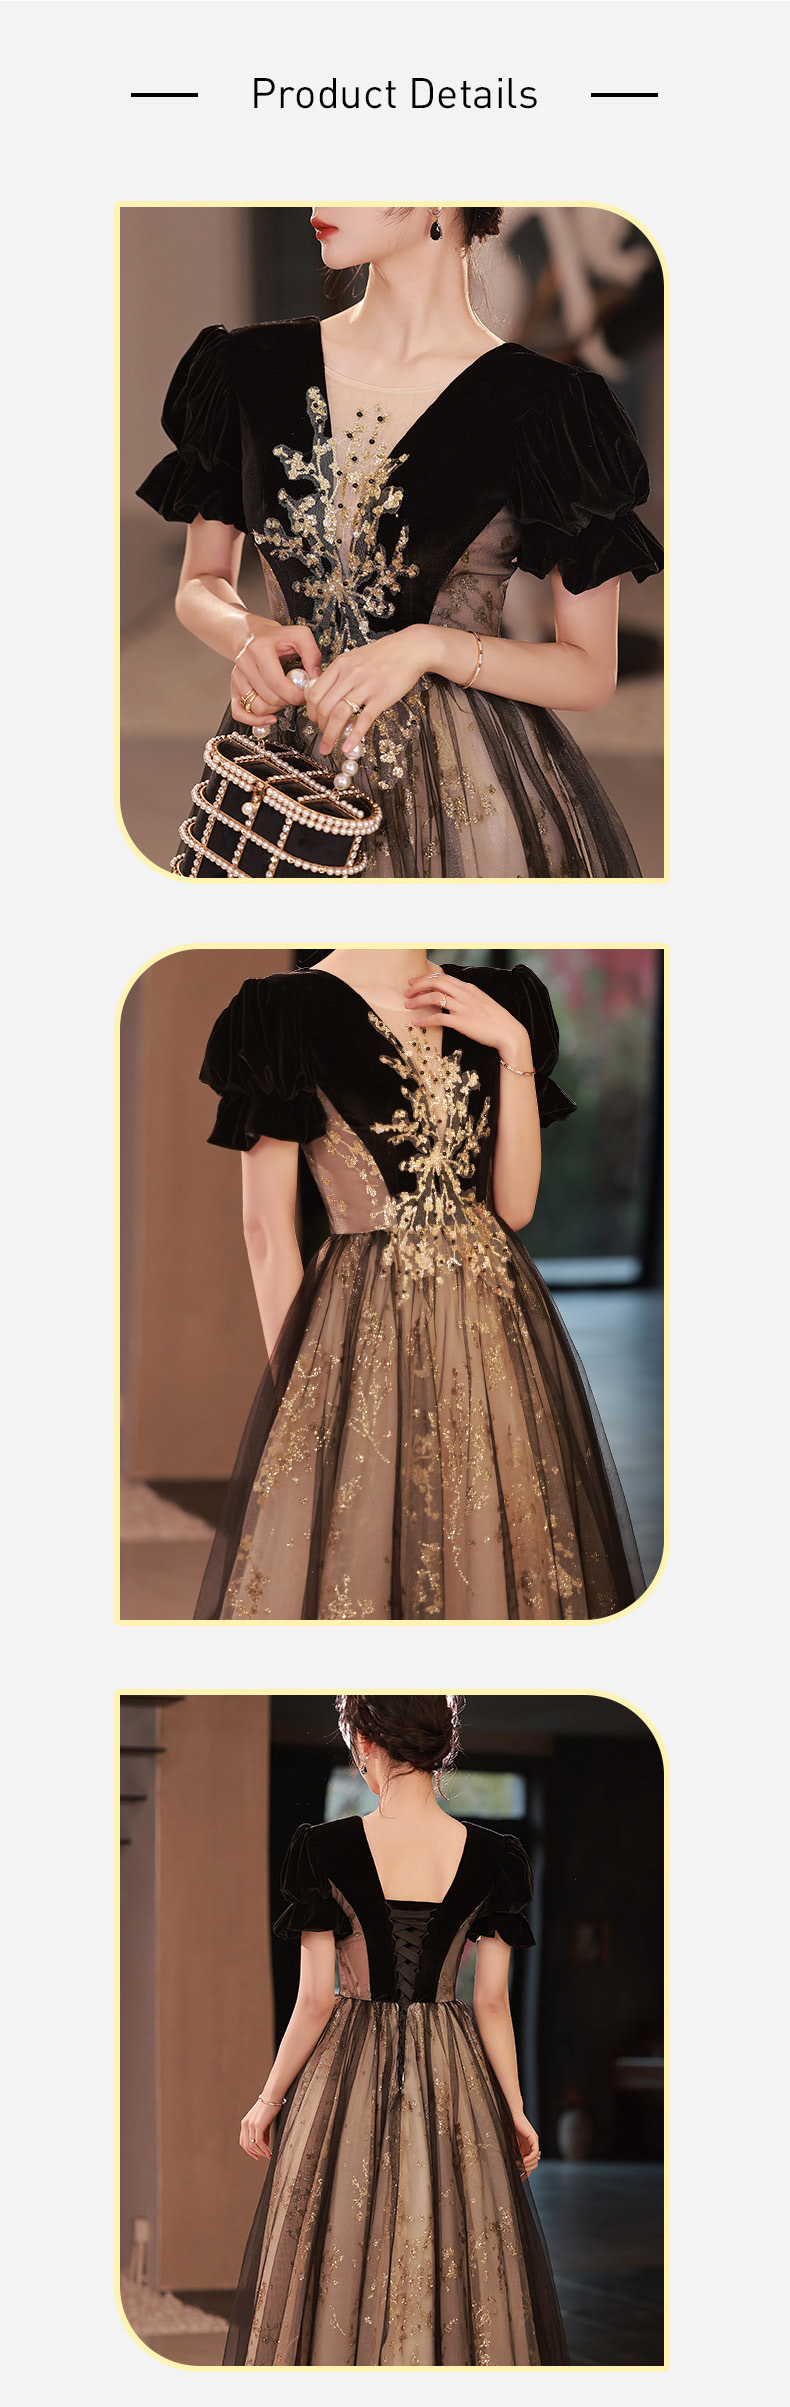 Dignified-Noble-Sequin-Black-Prom-Party-Banquet-Female-Formal-Dress10.jpg